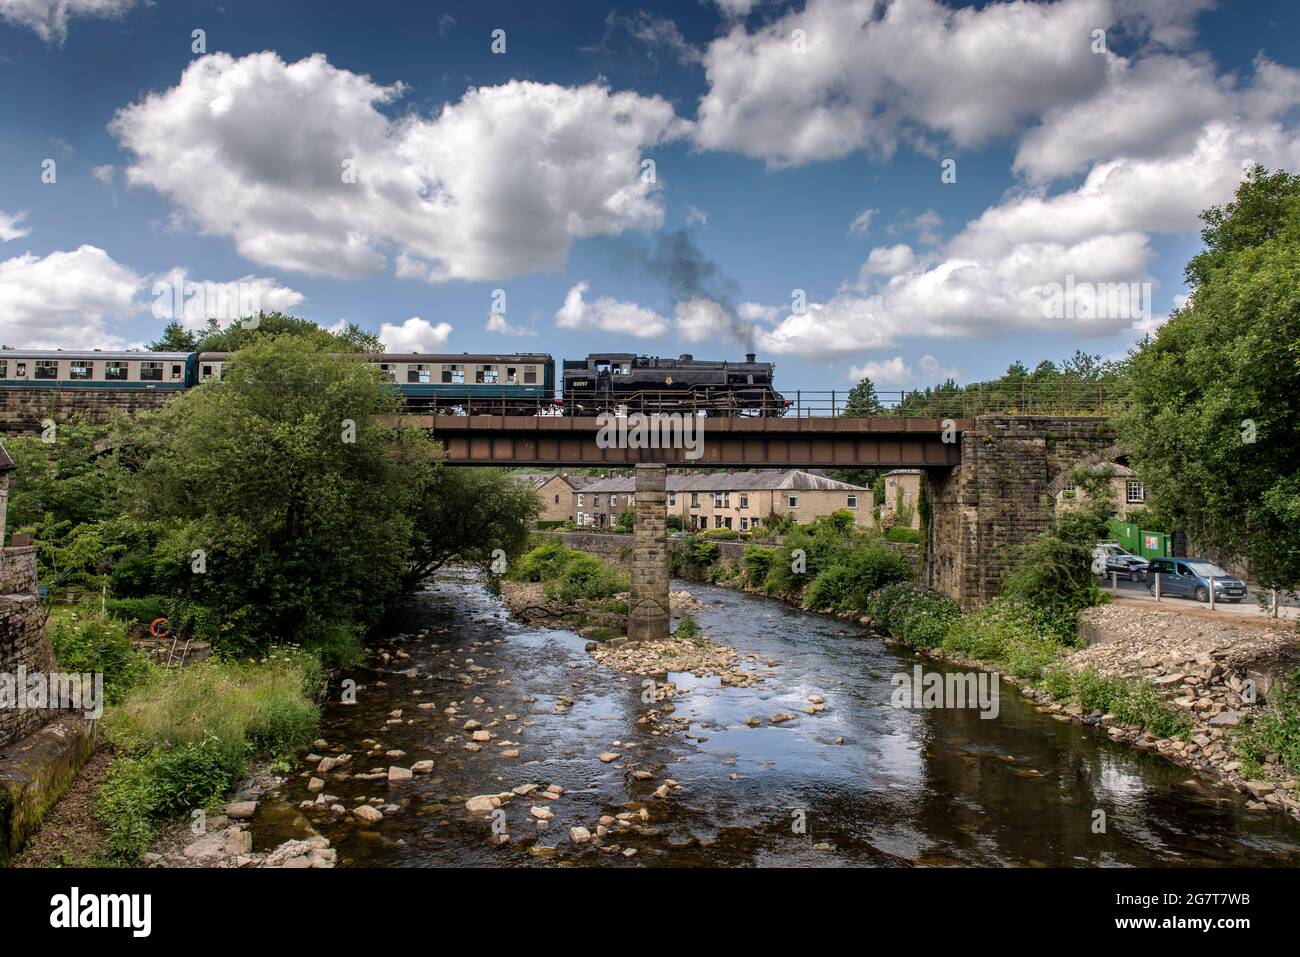 Lancashire, UK, Friday July 16, 2021. A steam engine from the East Lancashire Railway carries passengers across the River Irwell viaduct in the pretty village of Summerseat in Bury under glorious blue skies. Forecasters are predicting that the hot weather will continue through the weekend and into next week in the north west of England. Credit: Paul Heyes/Alamy Live News Stock Photo